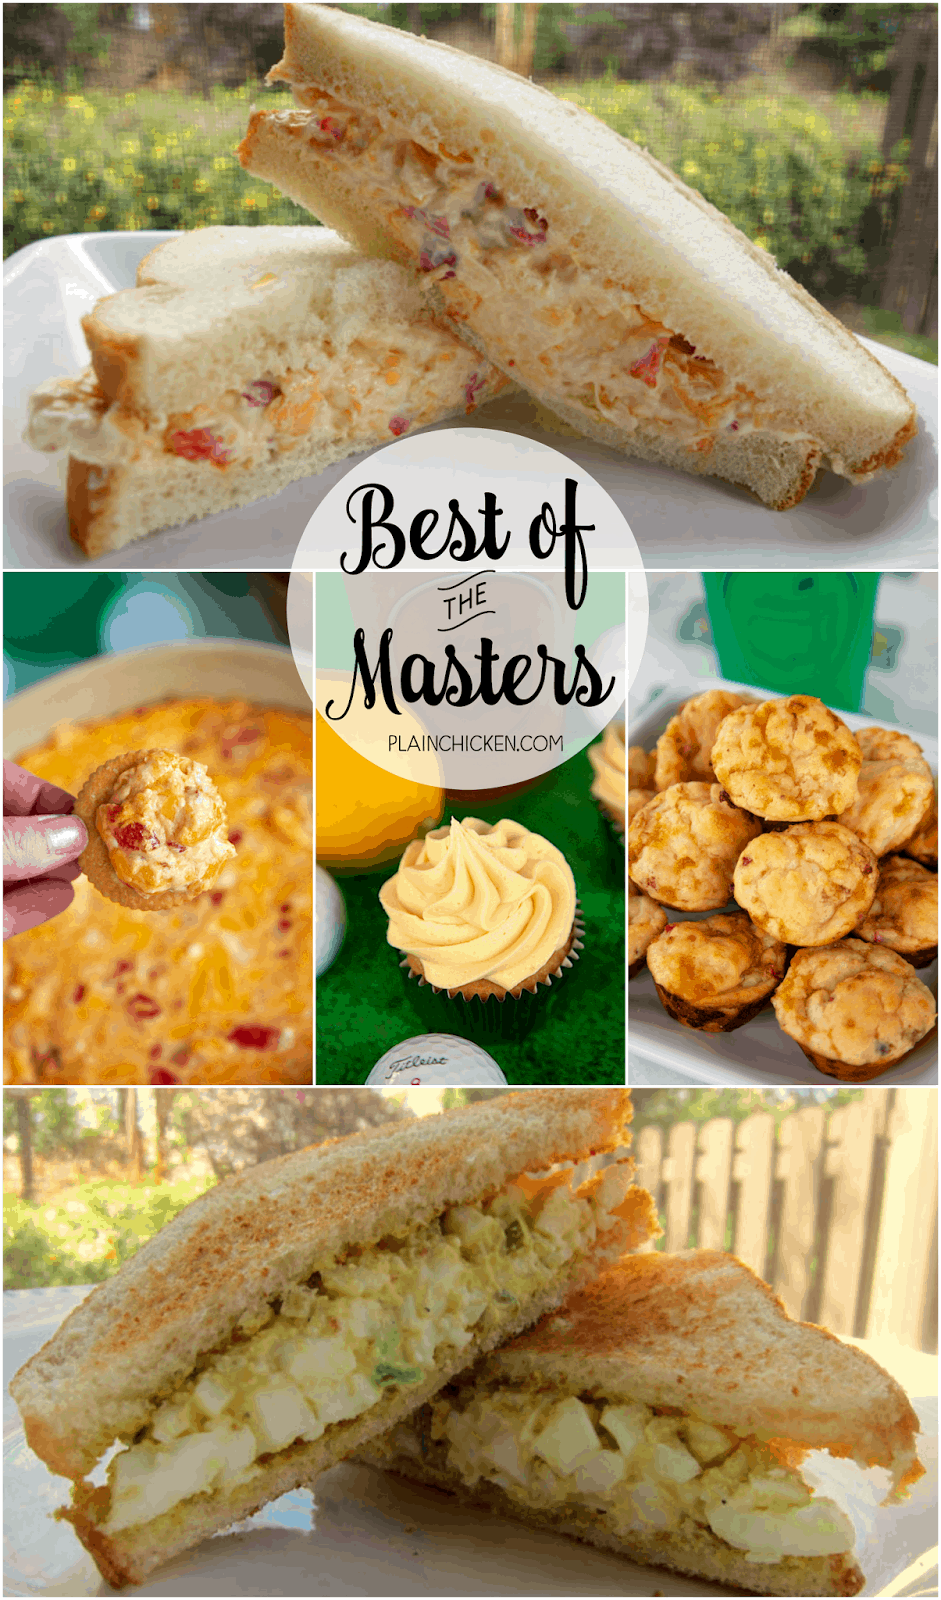 Best of The Masters - 9 recipes to make while watching The Masters - including the famous Egg Salad and Pimento Cheese